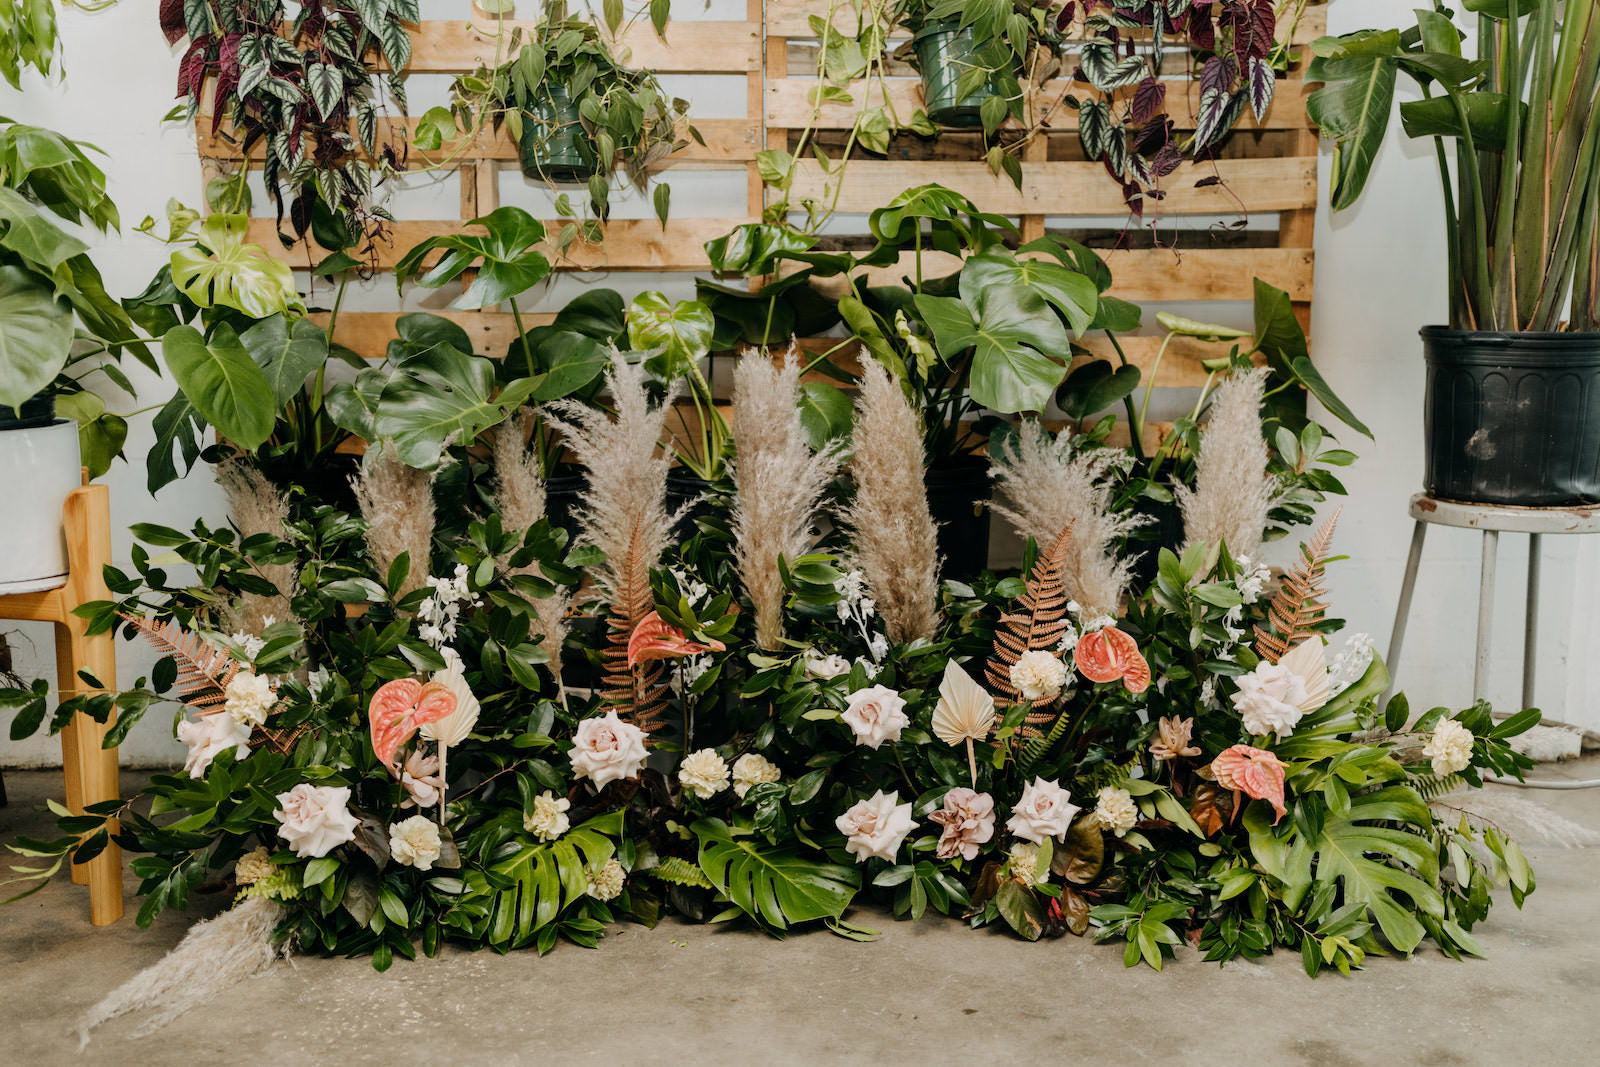 Boho Neutral Styled Shoot Decor | Wooden Pallets with Hanging Greenery Plants, Monstera Palm Trees, Floral Arrangements with Pampas Grass, Ivory Roses, Pink Anthurium | St. Pete Wedding Venue Wild Roots | Amber McWhorter Photography | Wedding Planner Elope Tampa Bay